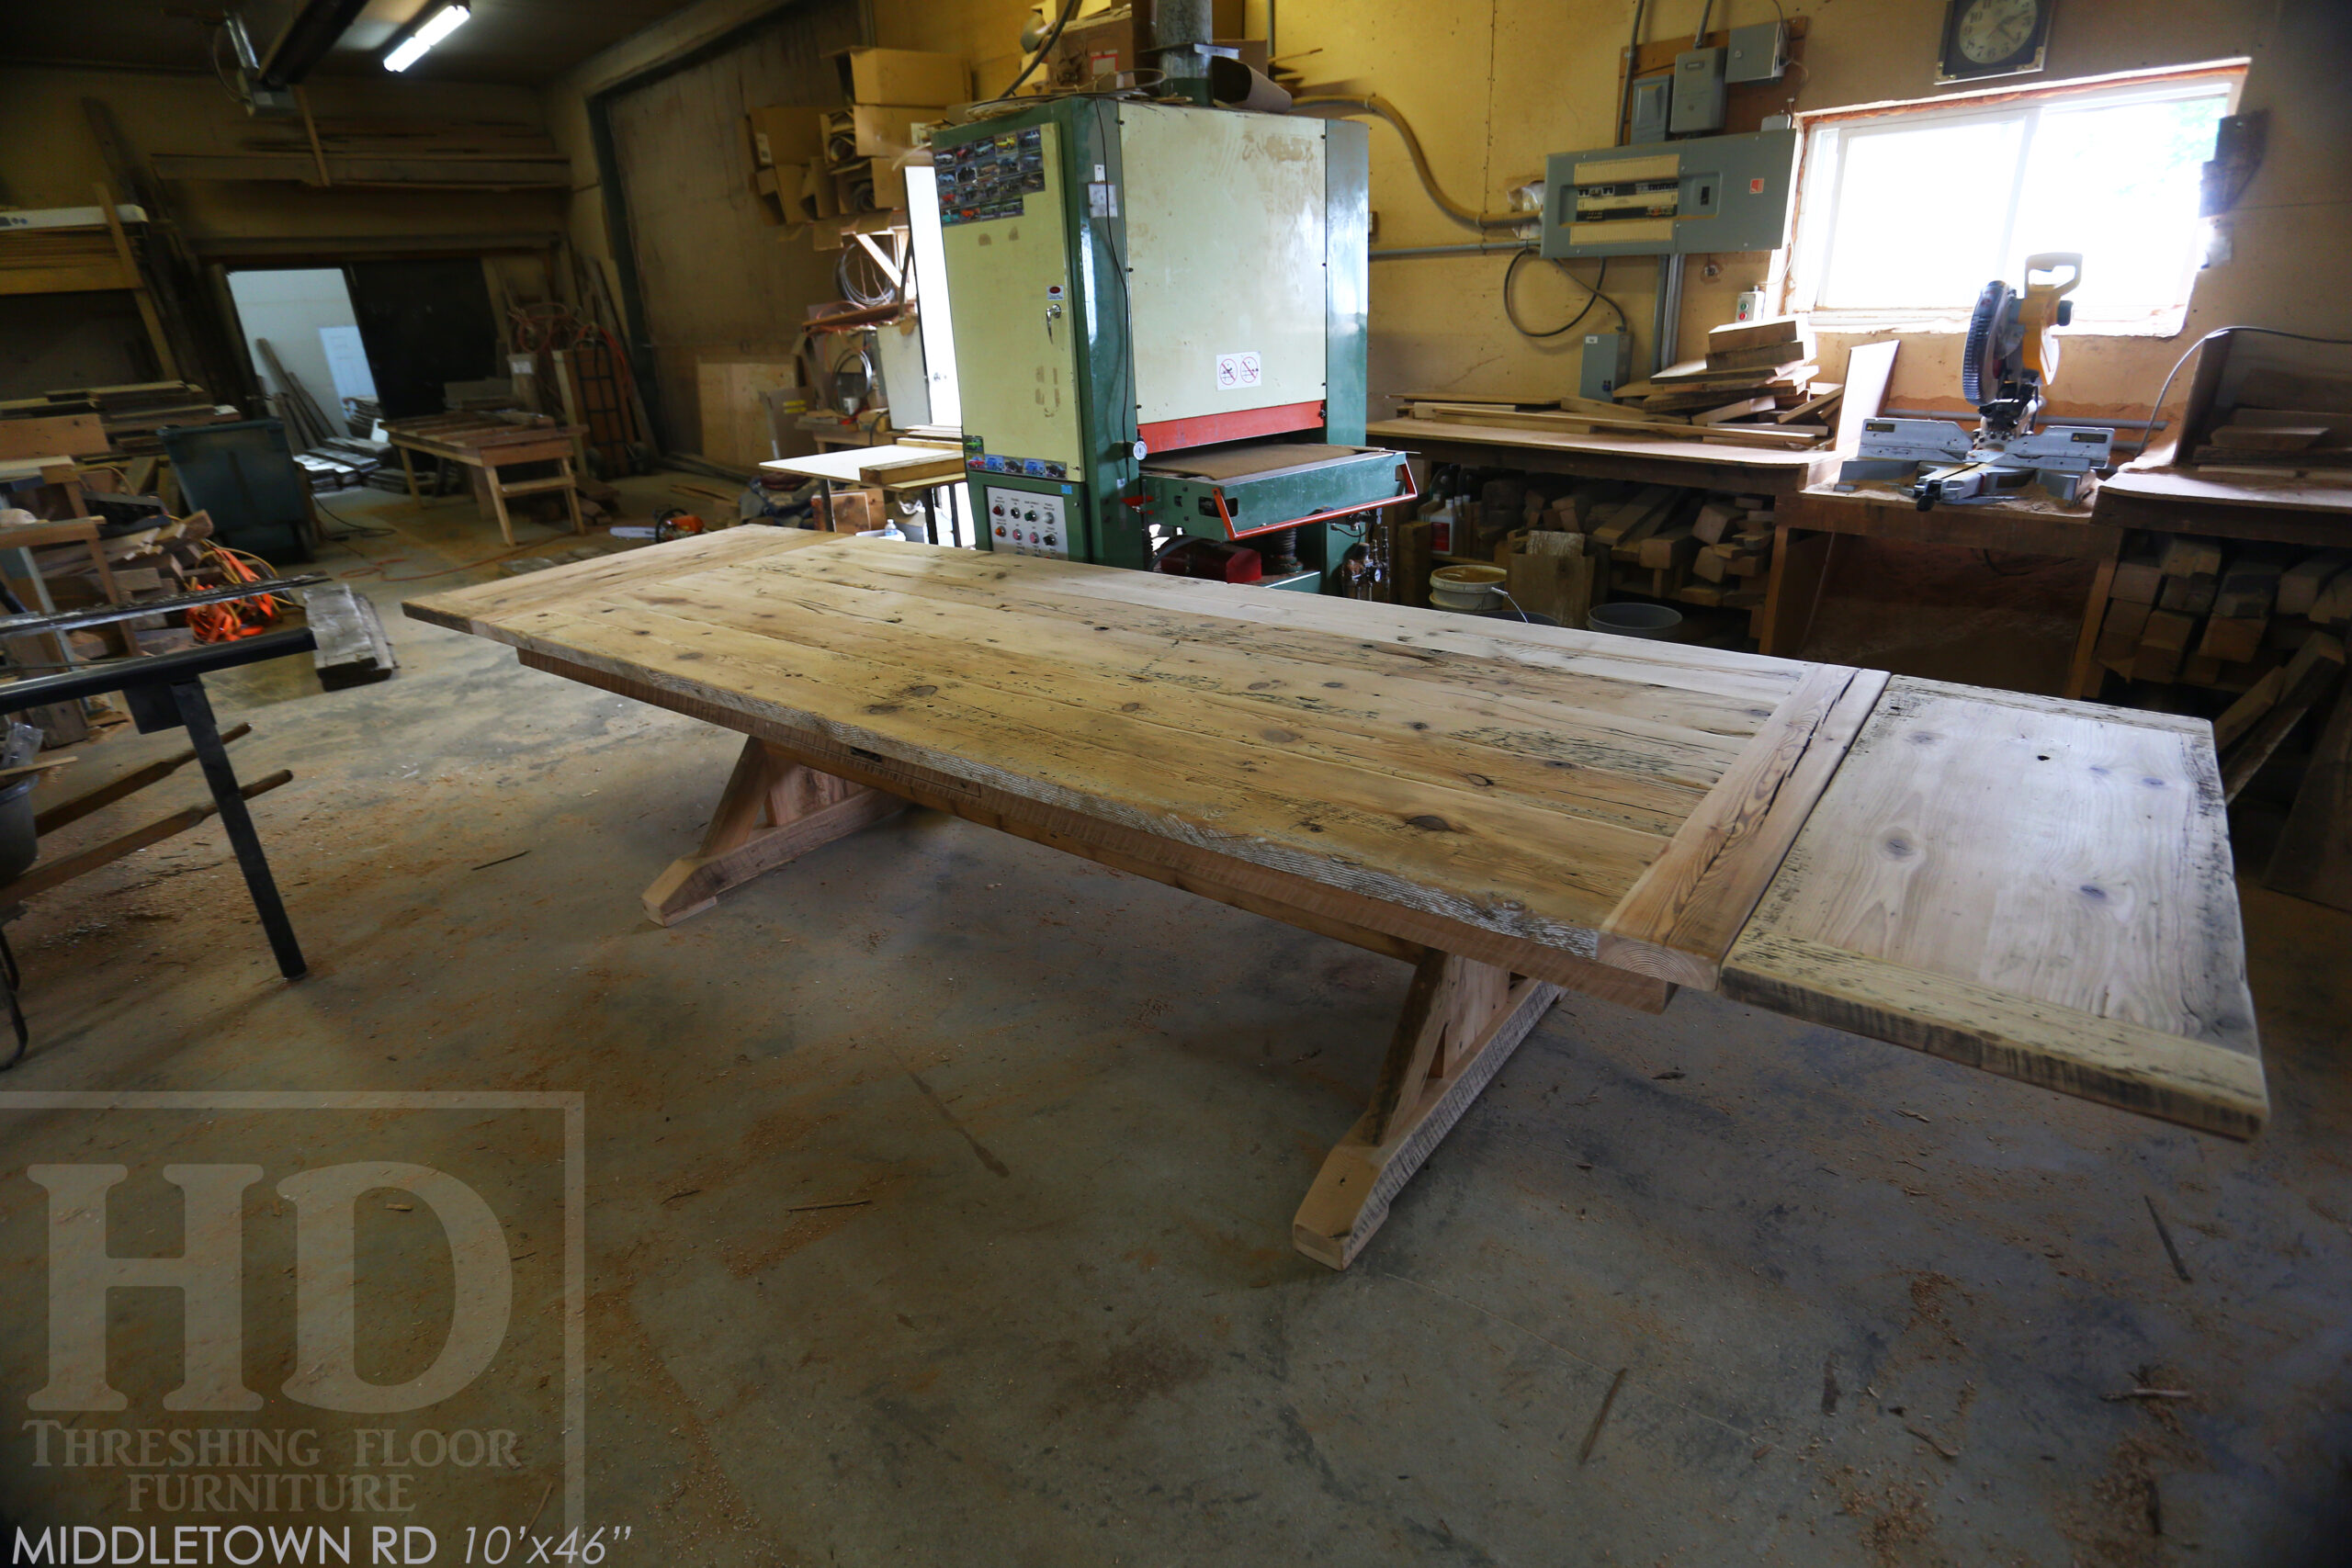 10' Ontario Barnwood Sawbuck Table we made for an Dundas, Ontario home - 46" wide - 2" Hemlock Threshing Floor Top - 3" skirting / 2 Drawers / Lee Valley Hardware Handle - Original edges & distressing maintained - Premium epoxy + satin polyurethane finish - Two 18" Leaf Extensions [making total length 13' when extended] - 10' [matching] Reclaimed Wood Bench with Trestle base - www.table.ca